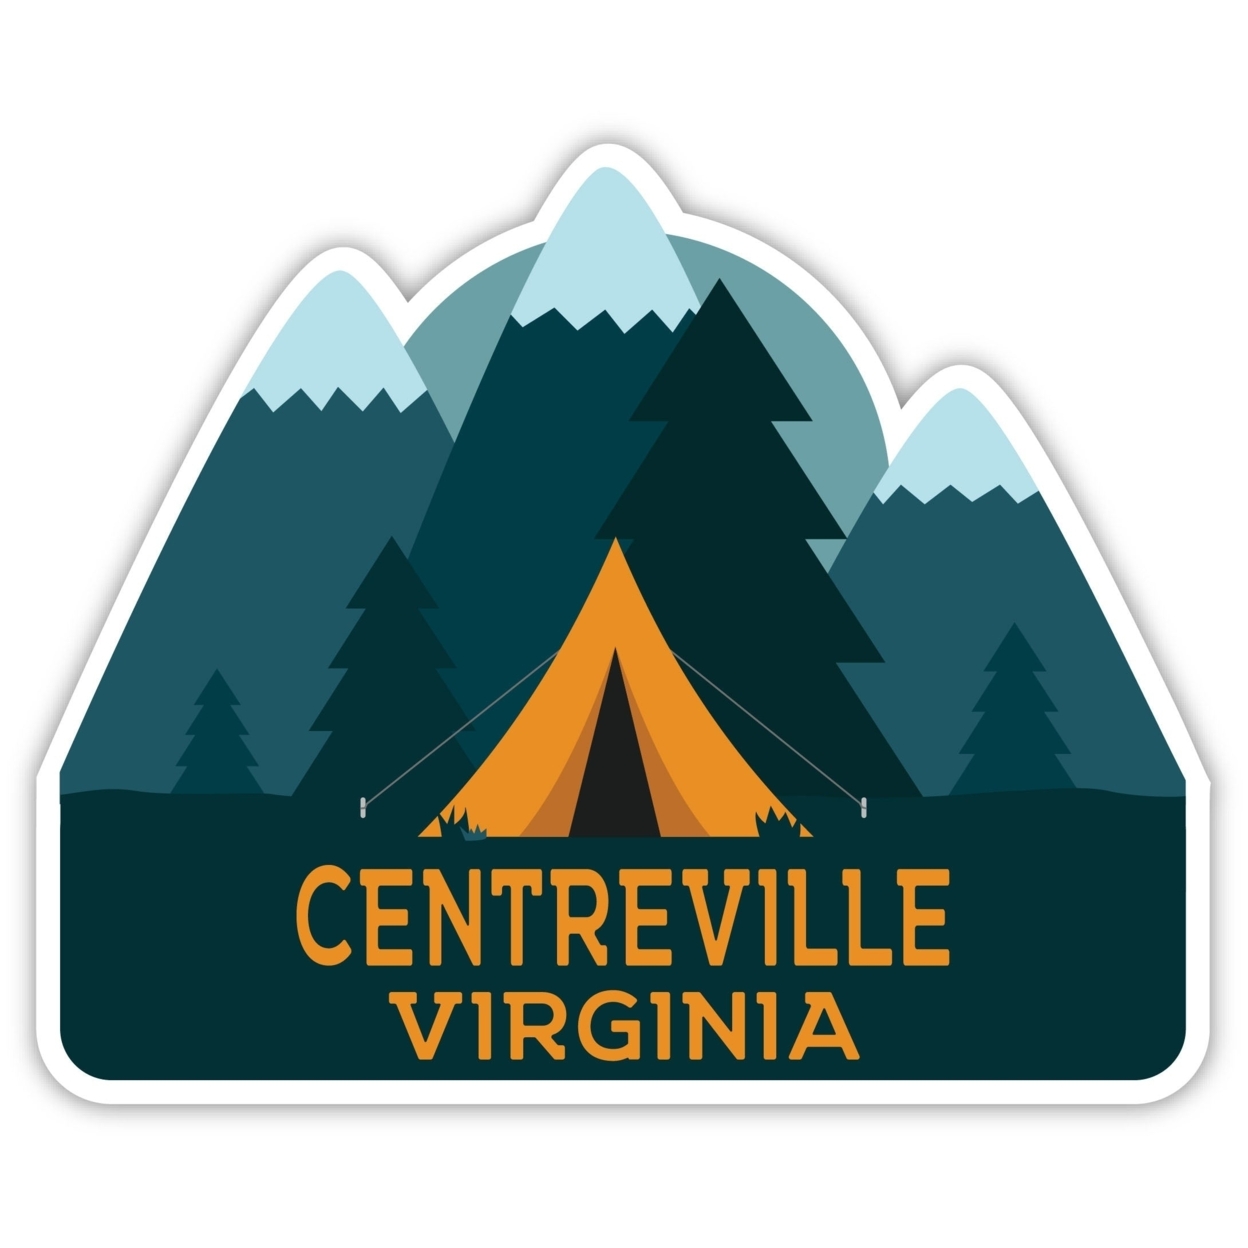 Centreville Virginia Souvenir Decorative Stickers (Choose Theme And Size) - 4-Pack, 10-Inch, Tent